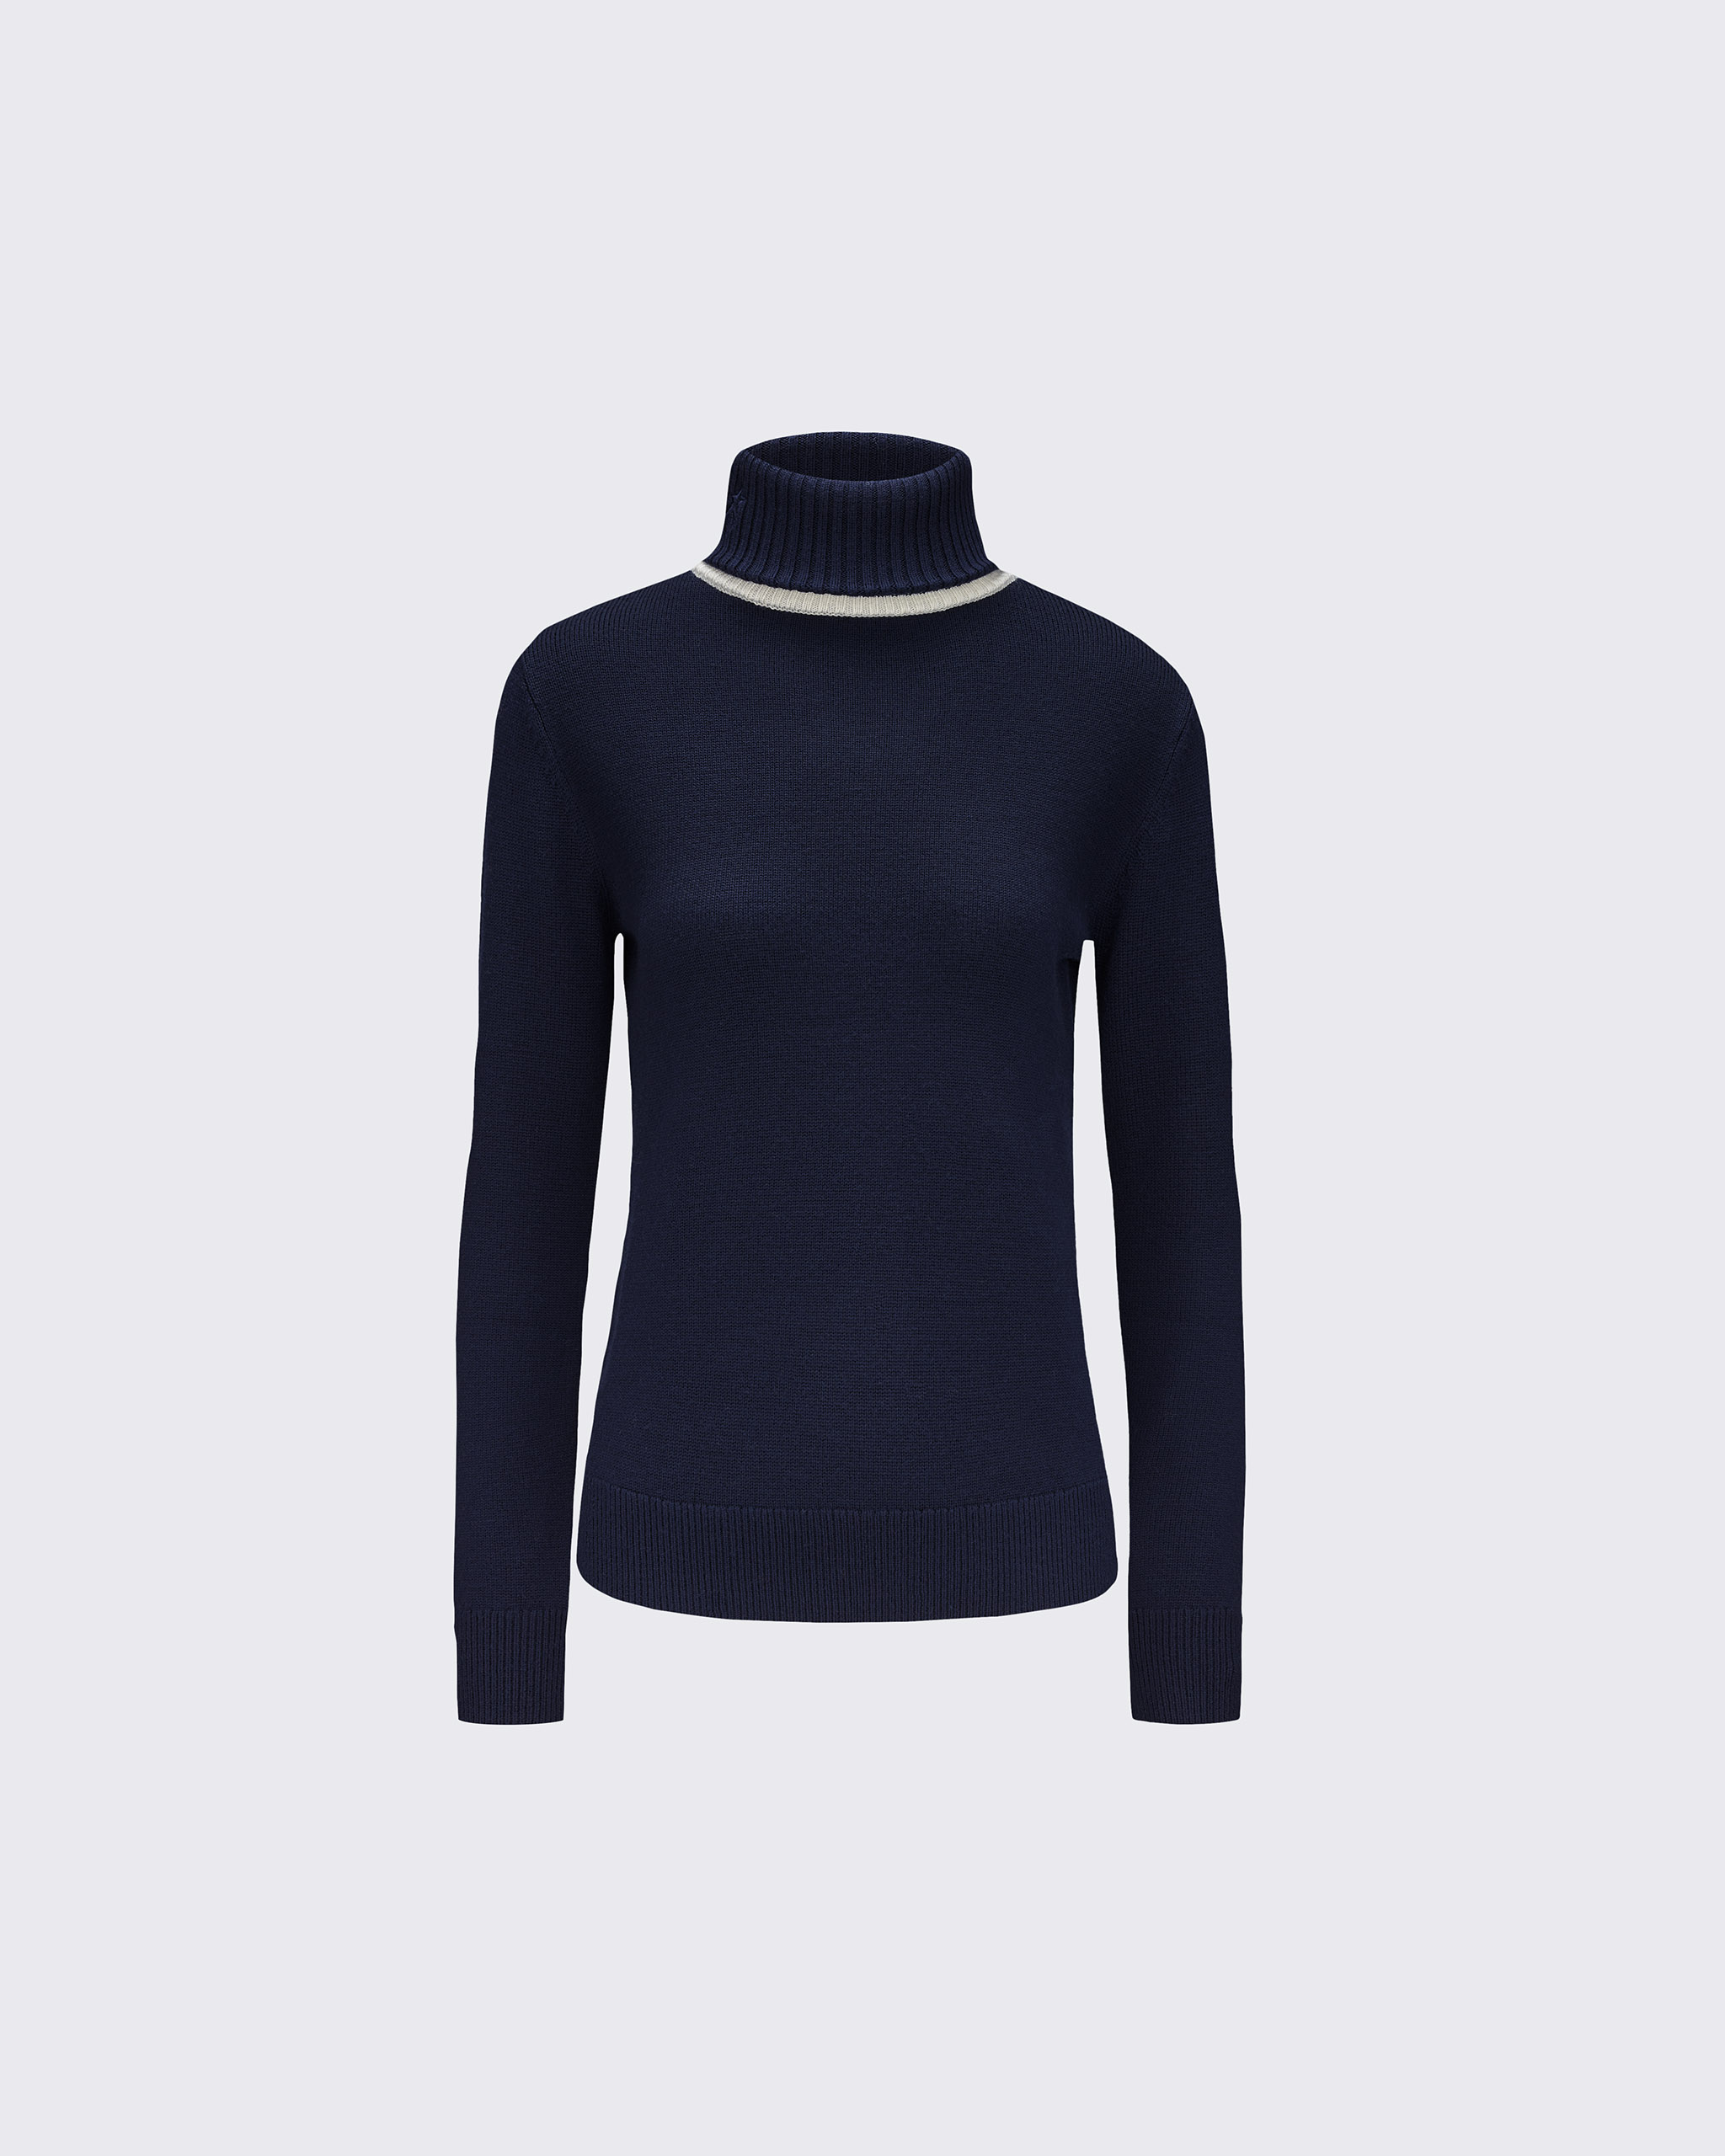 Perfect Moment Merino Wool Turtleneck Sweater Xl In Navy